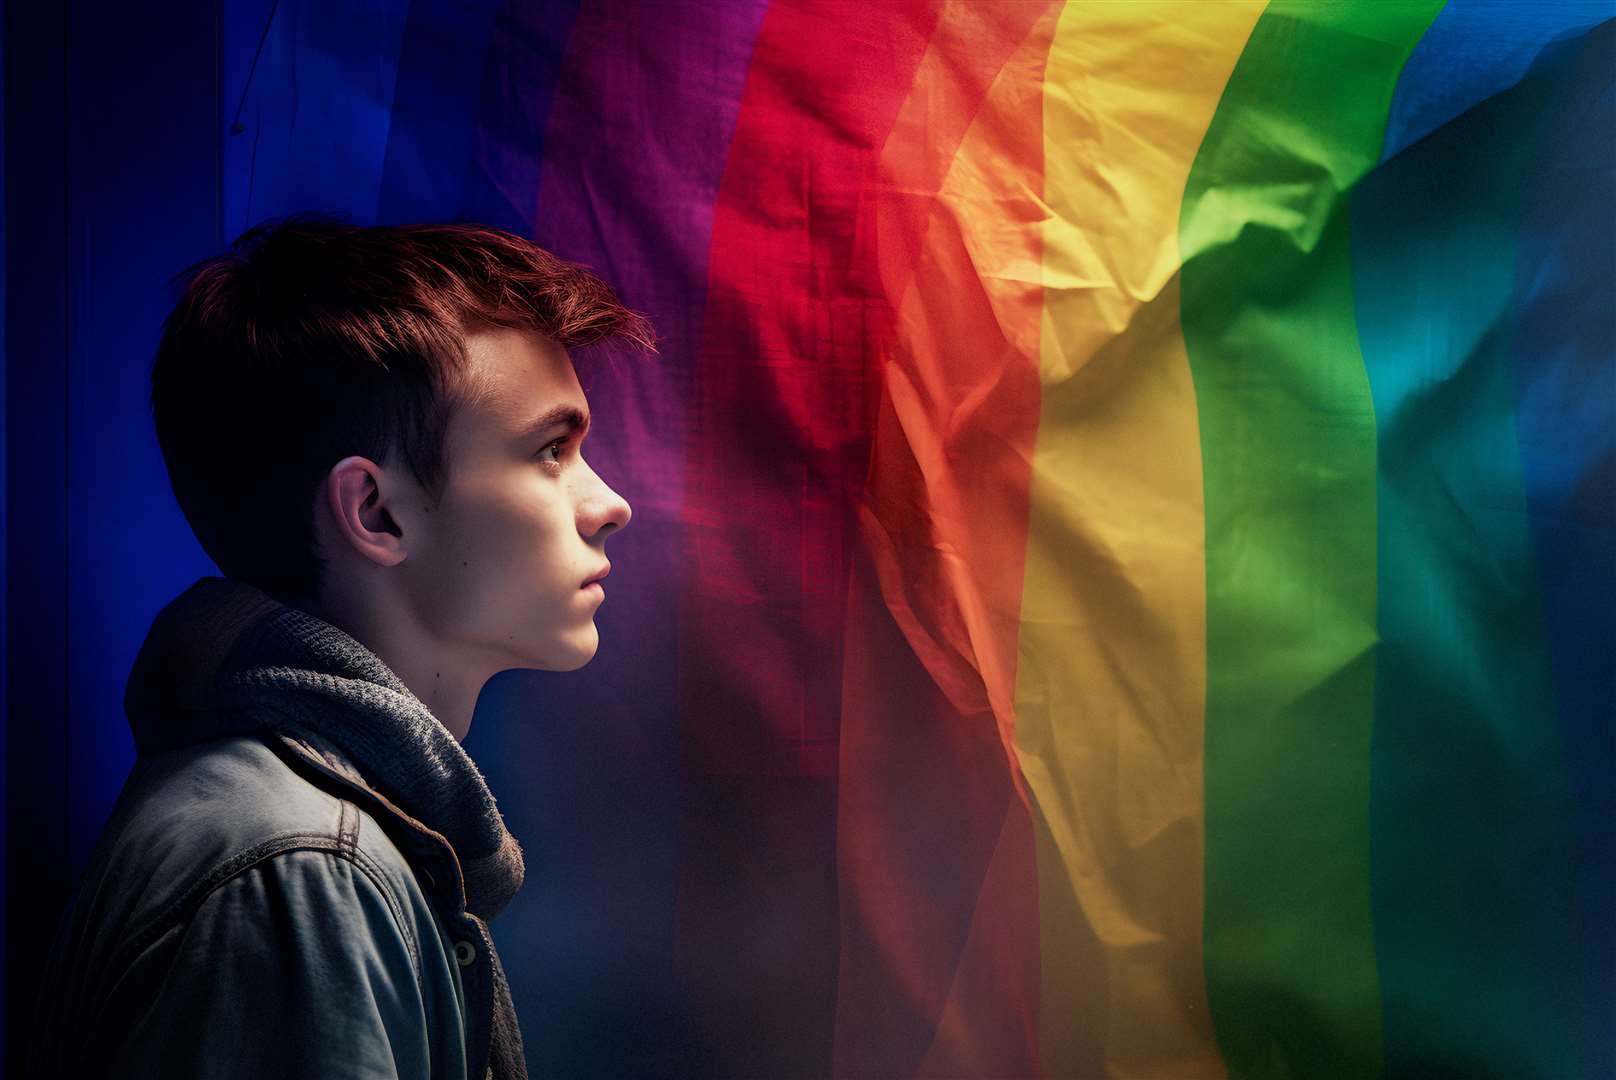 Most people may never think about their name, but plenty of LGBTQ+ people do. Picture: Callum Mackay (generated by AI)